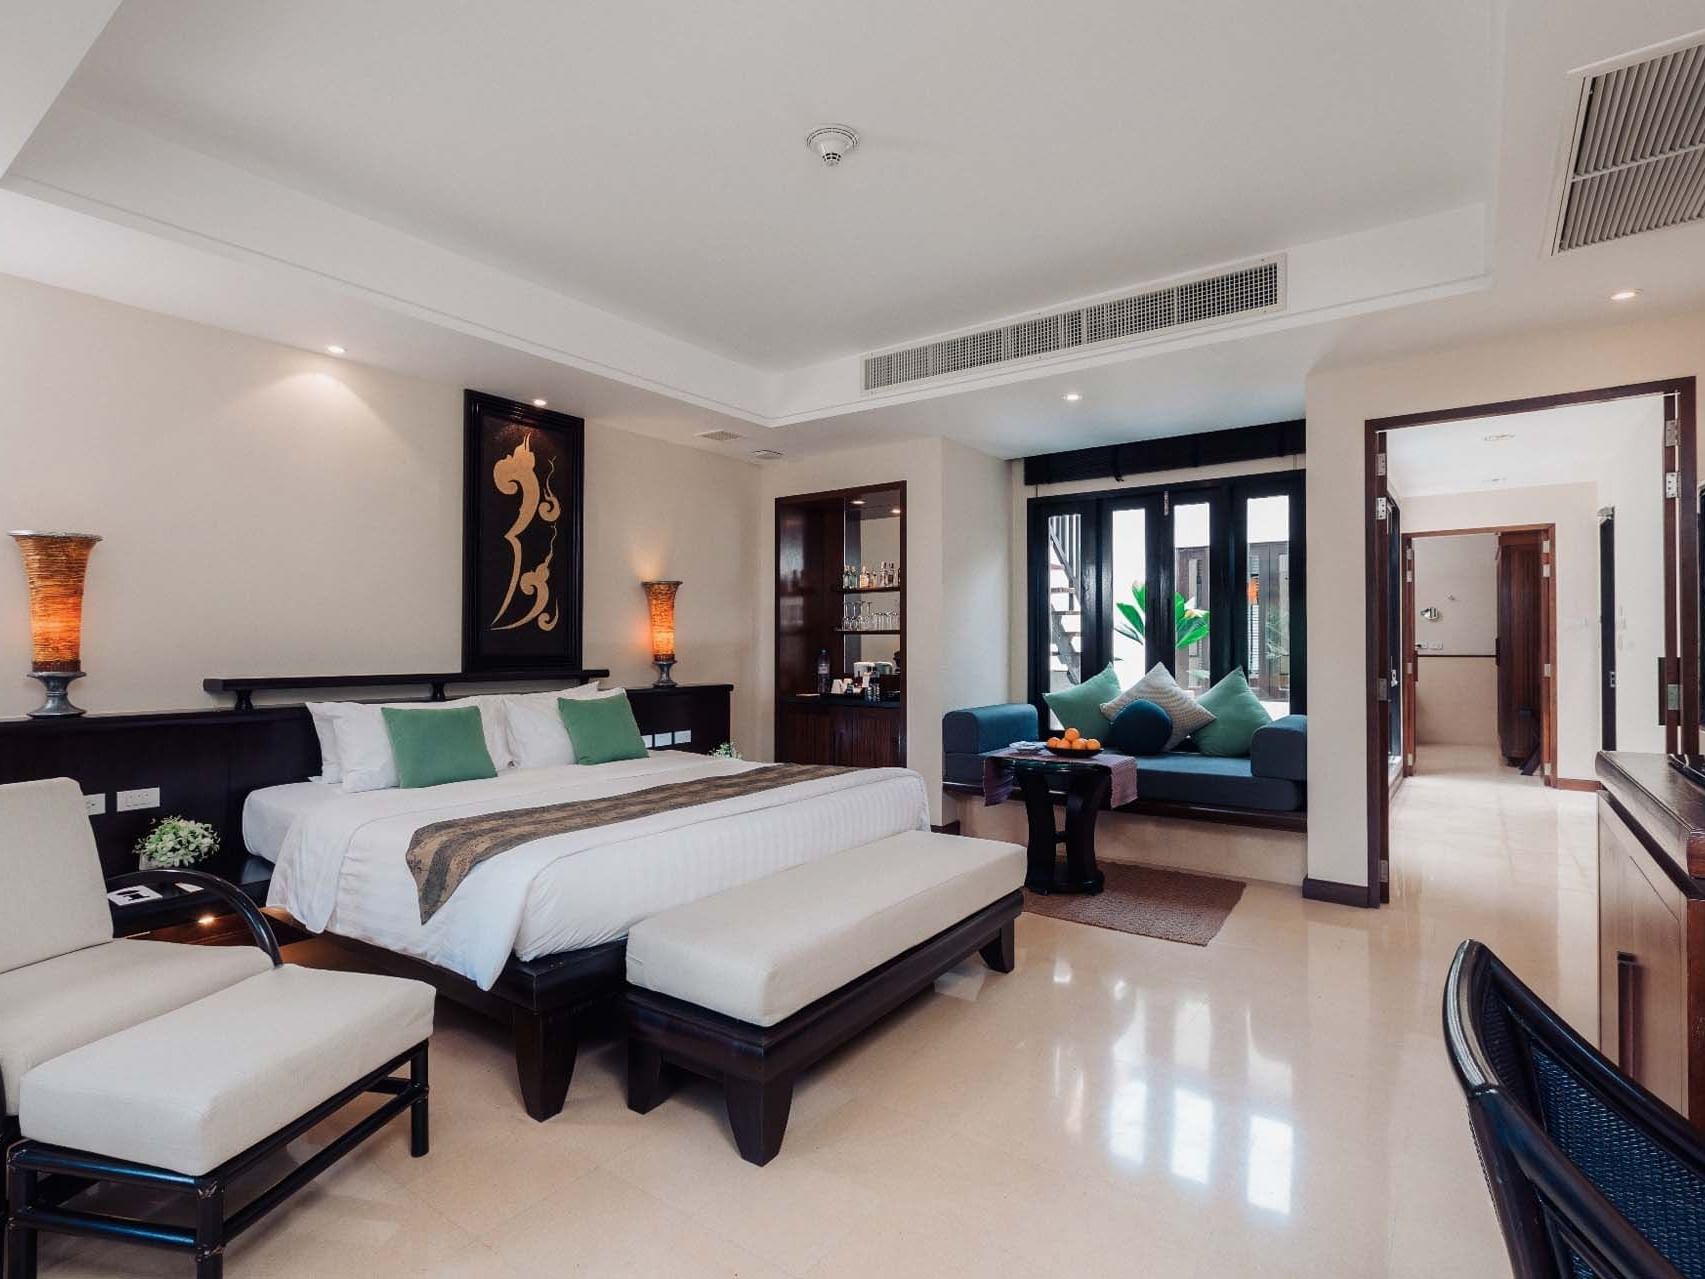 King bed in Penthouse Plunge Villa at Paradox Hotels & Resorts